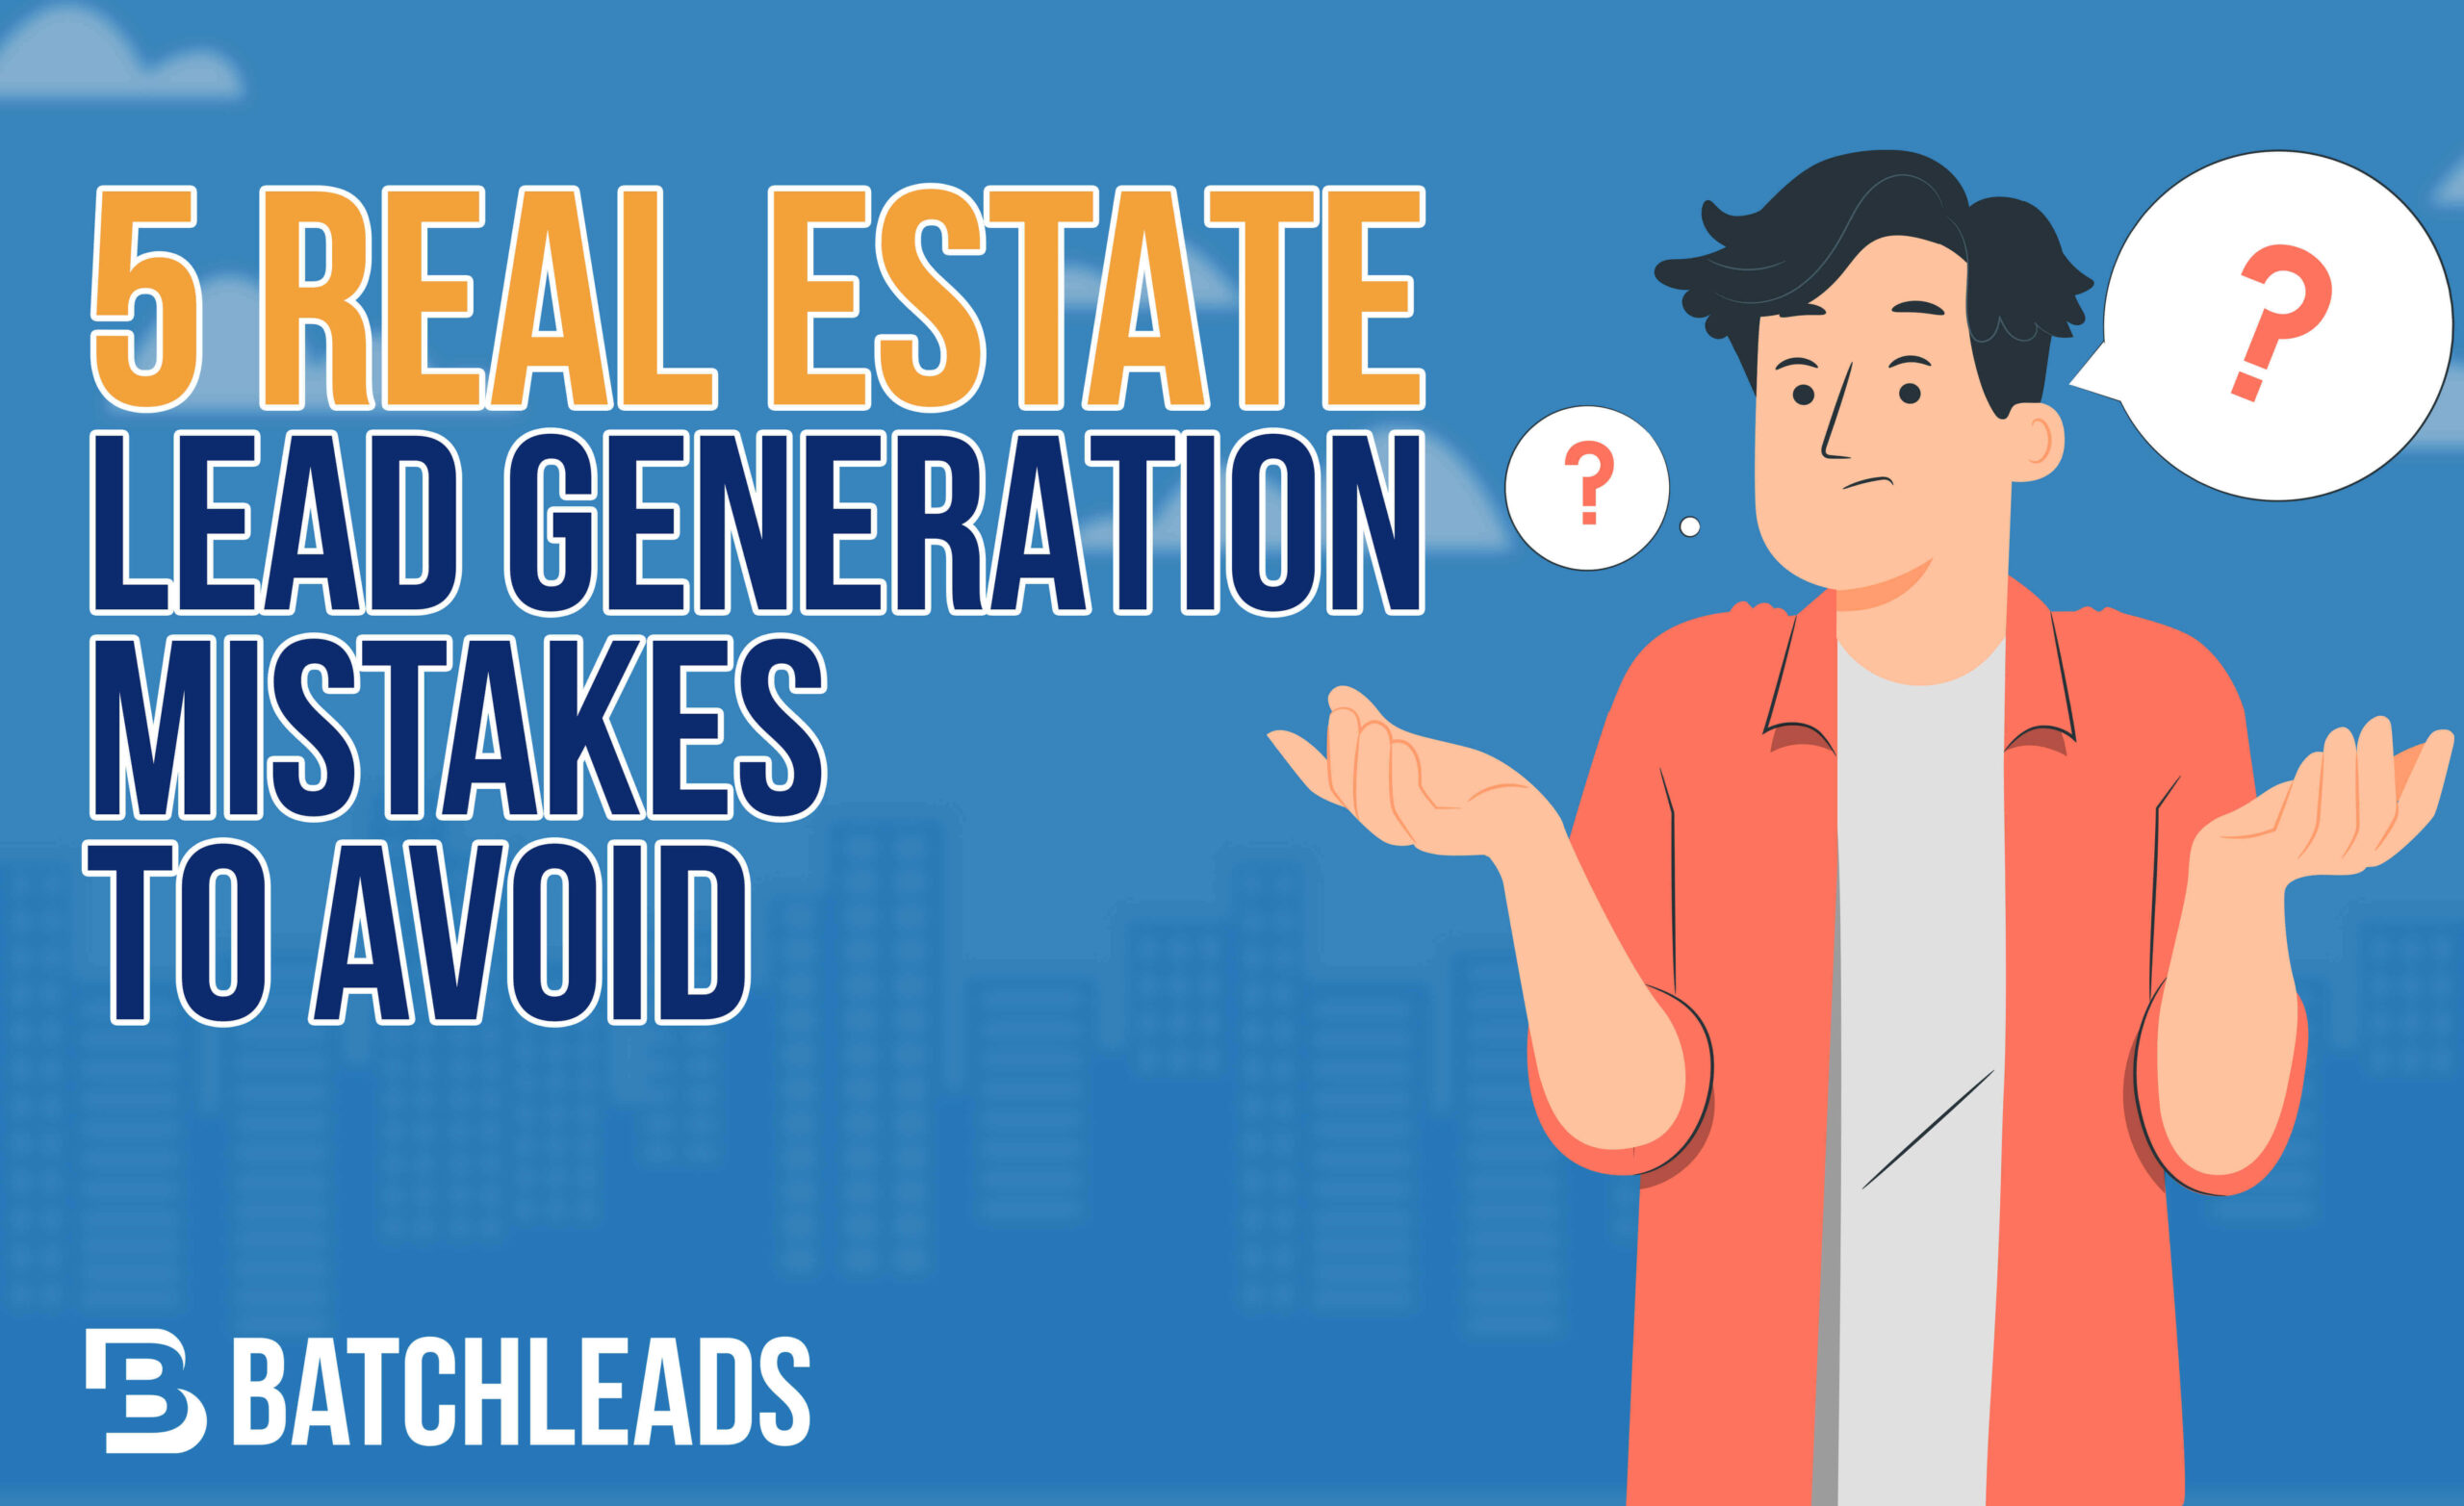 5 Real Estate Lead Generation Mistakes to Avoid